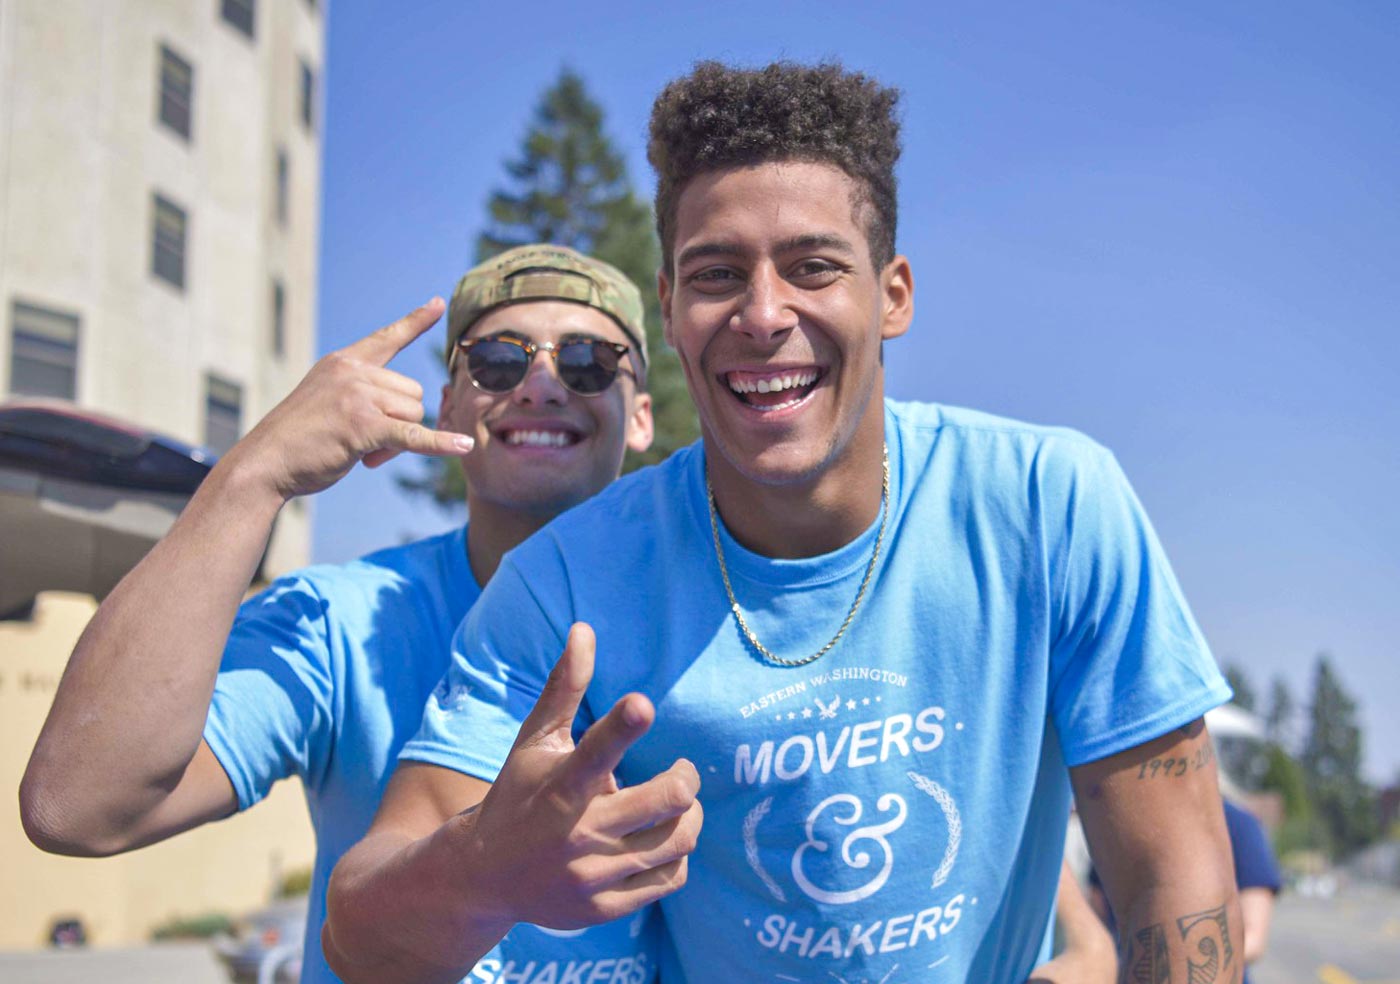 Photo: two male students in "Movers & Shakers" T-shirts pose during Move-In Day